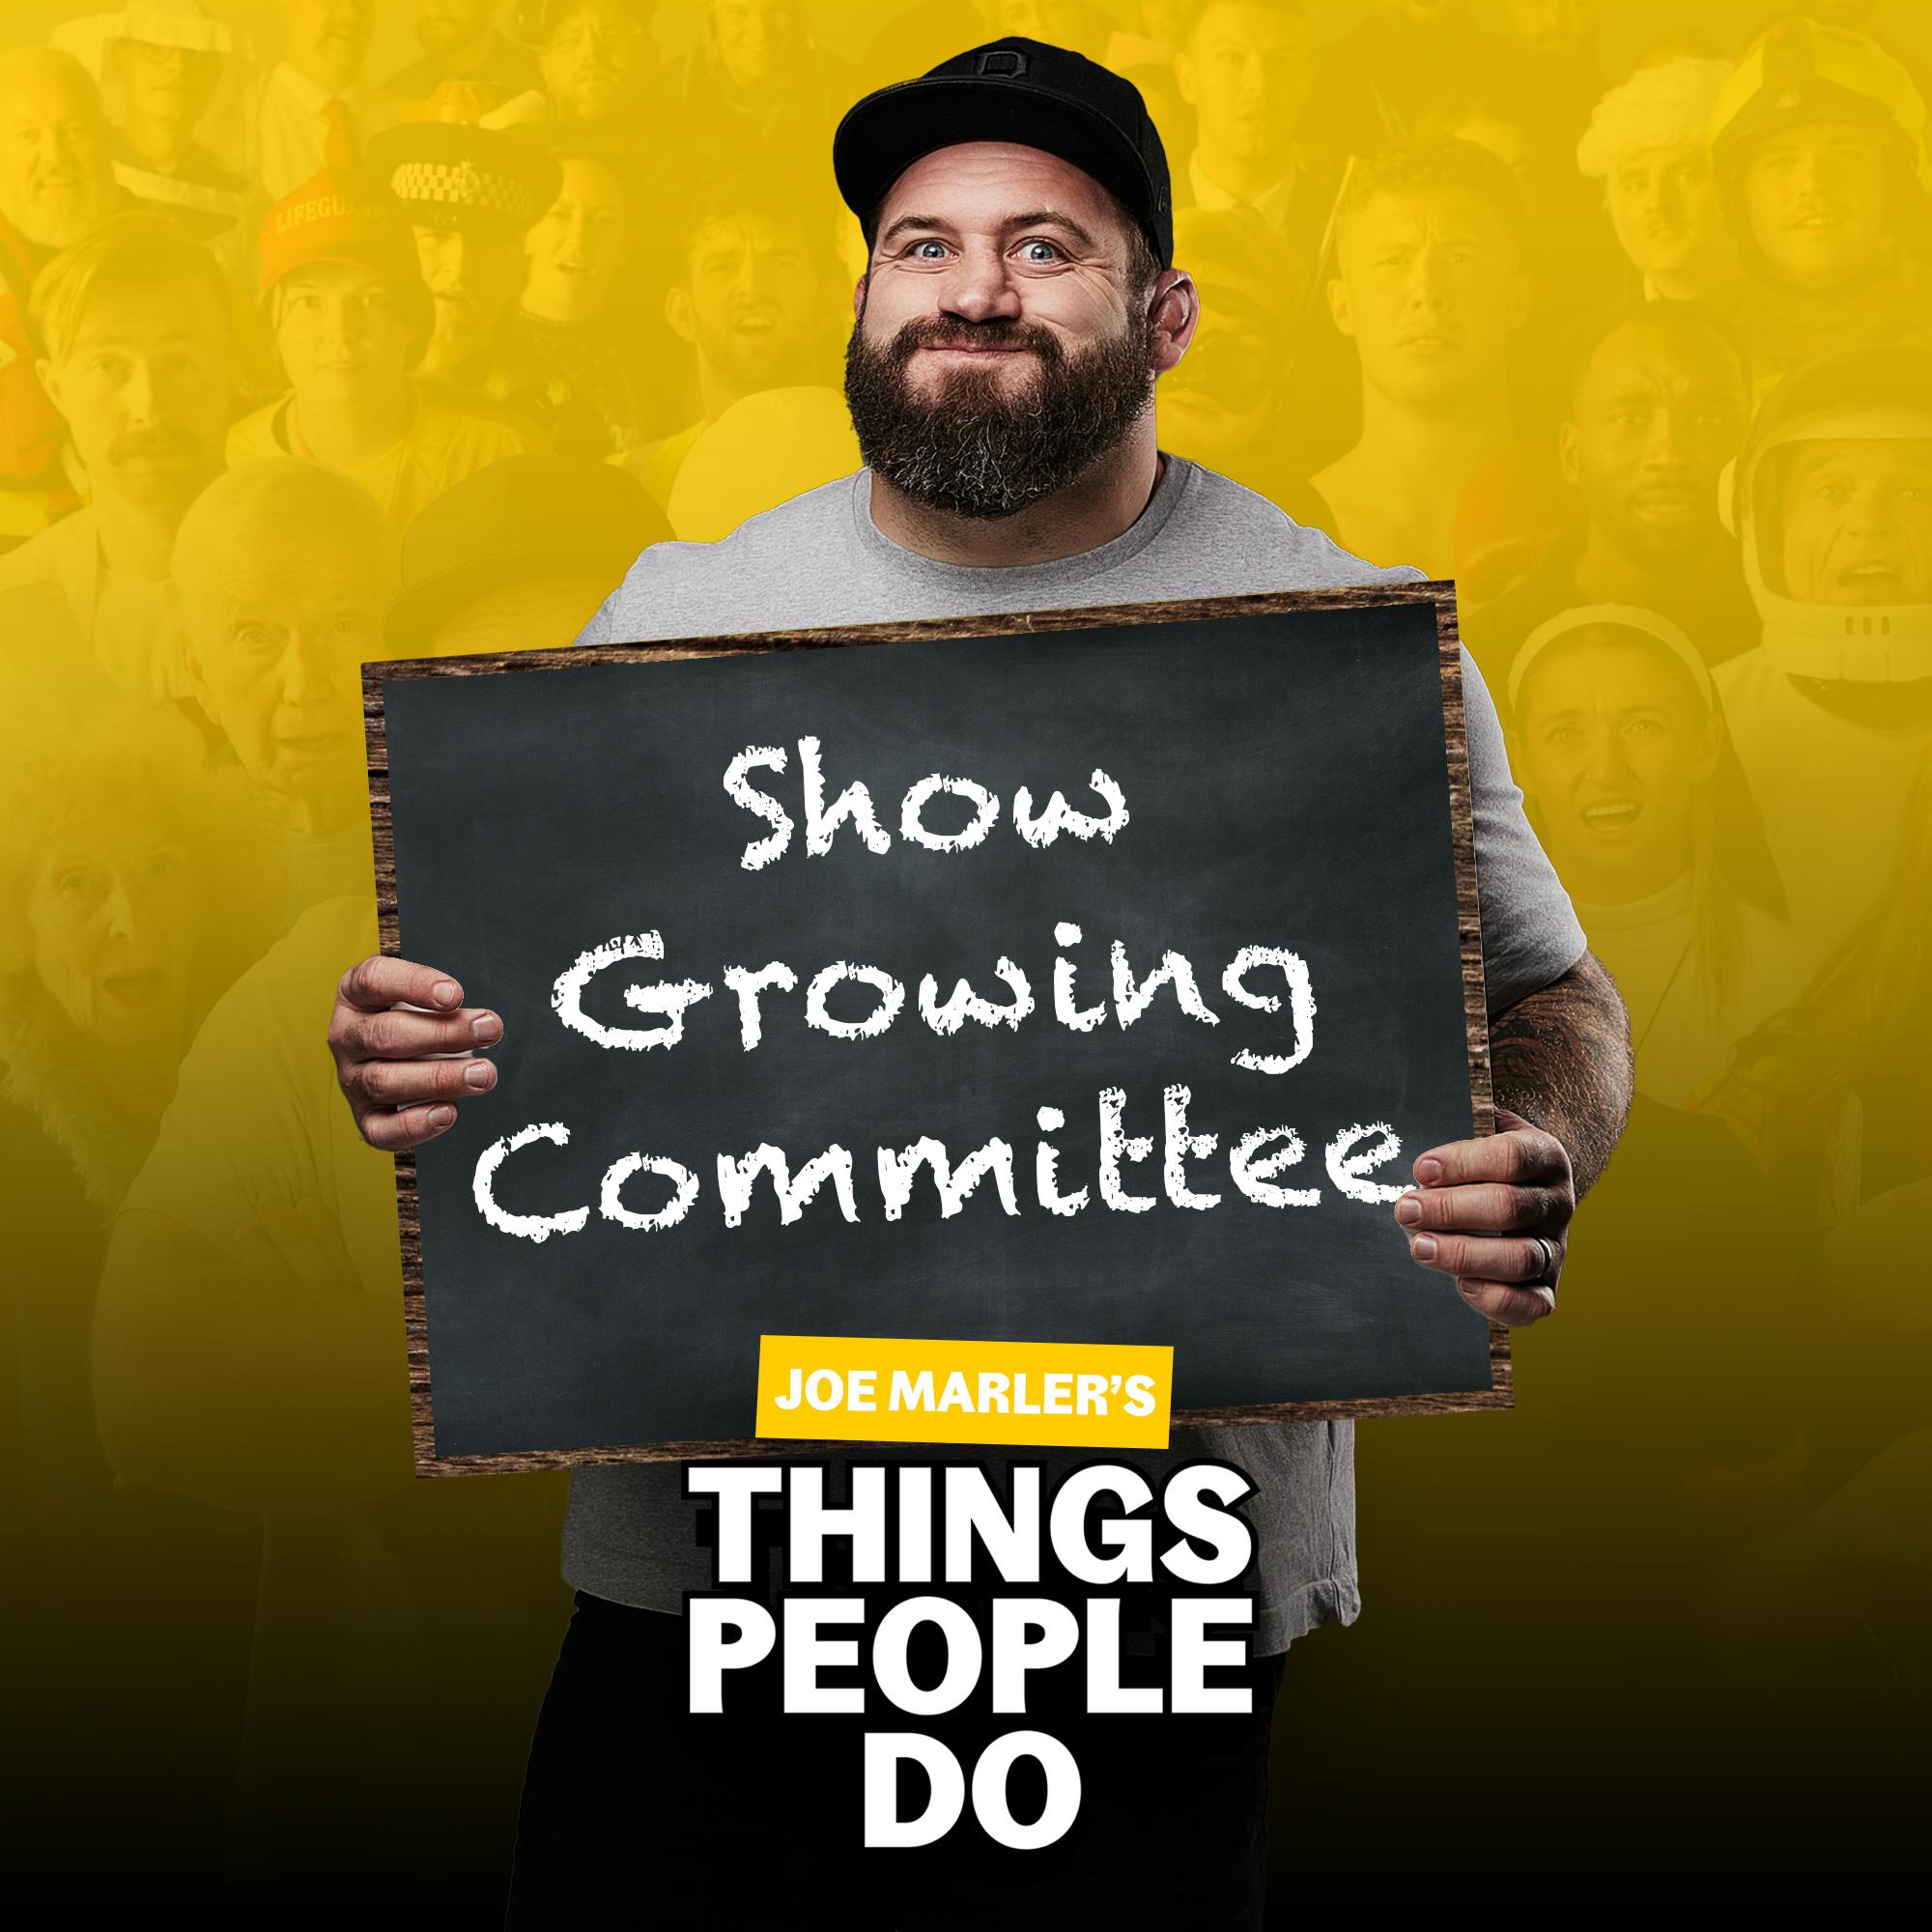 The Show Growing Committee: Joe Marler costumes, recycle bin drama and a neon sign betrayal